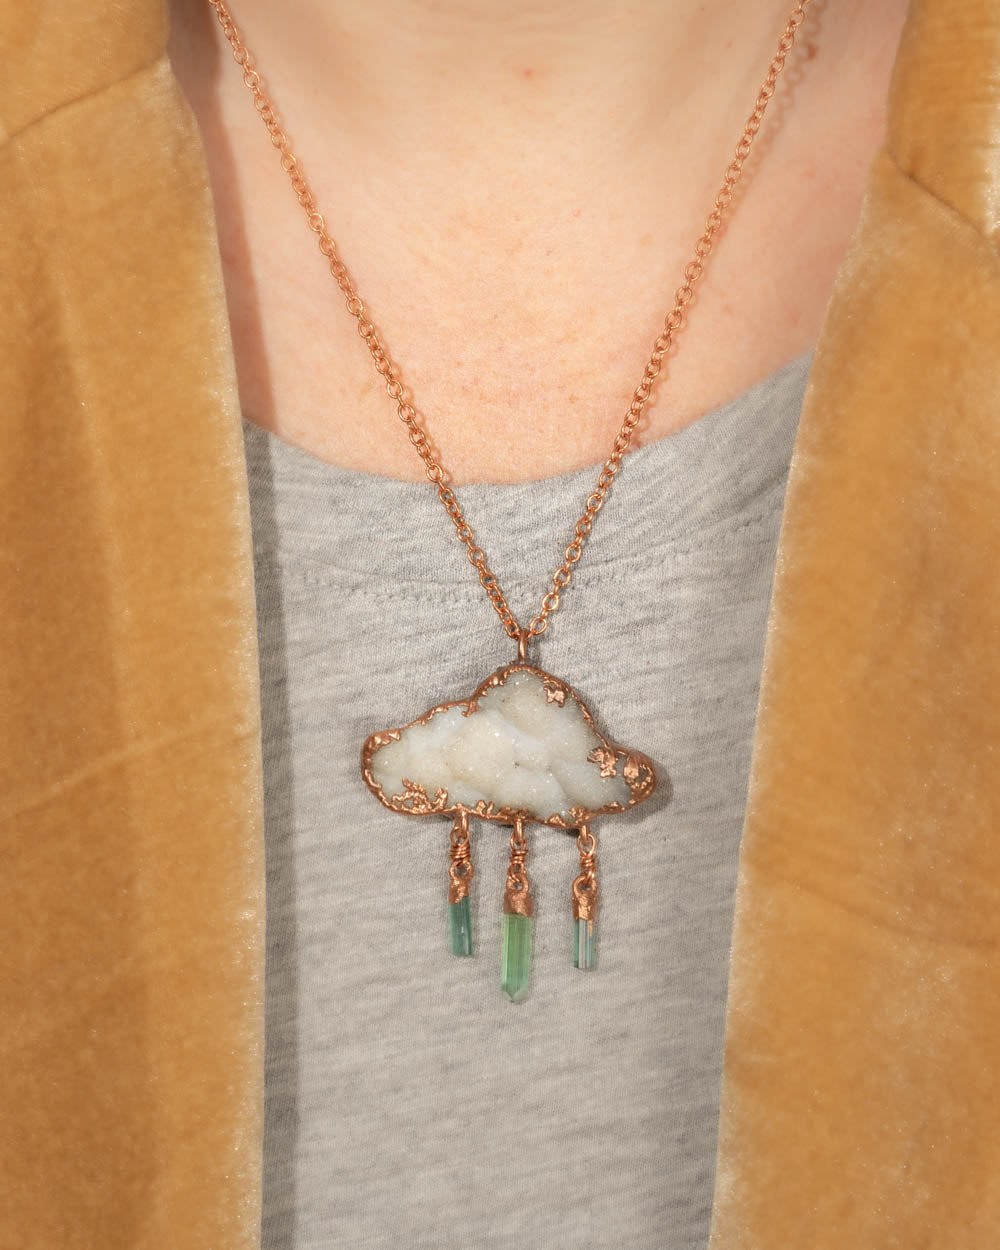 Raincloud Necklace with Tourmaline Crystals